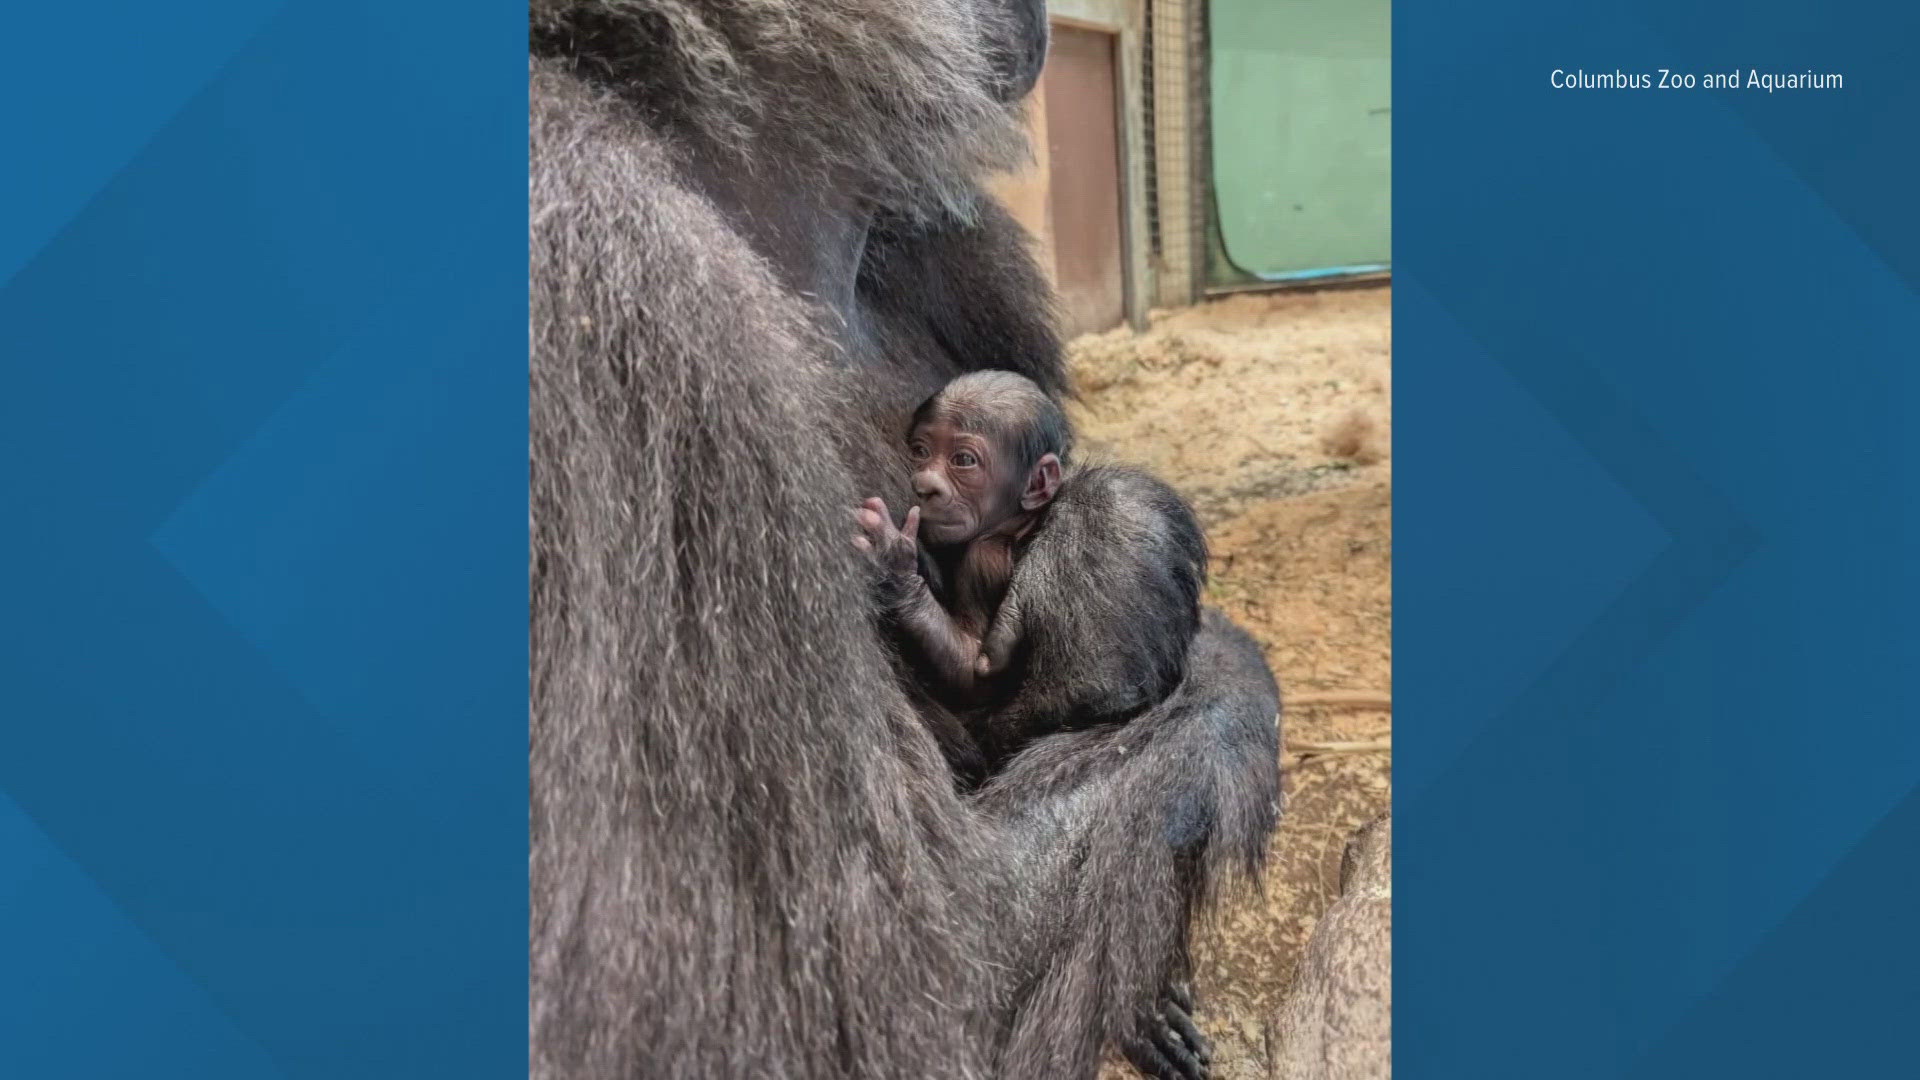 The baby western lowland gorilla was born on June 29 to first-time mother Sue and father Ktembe.